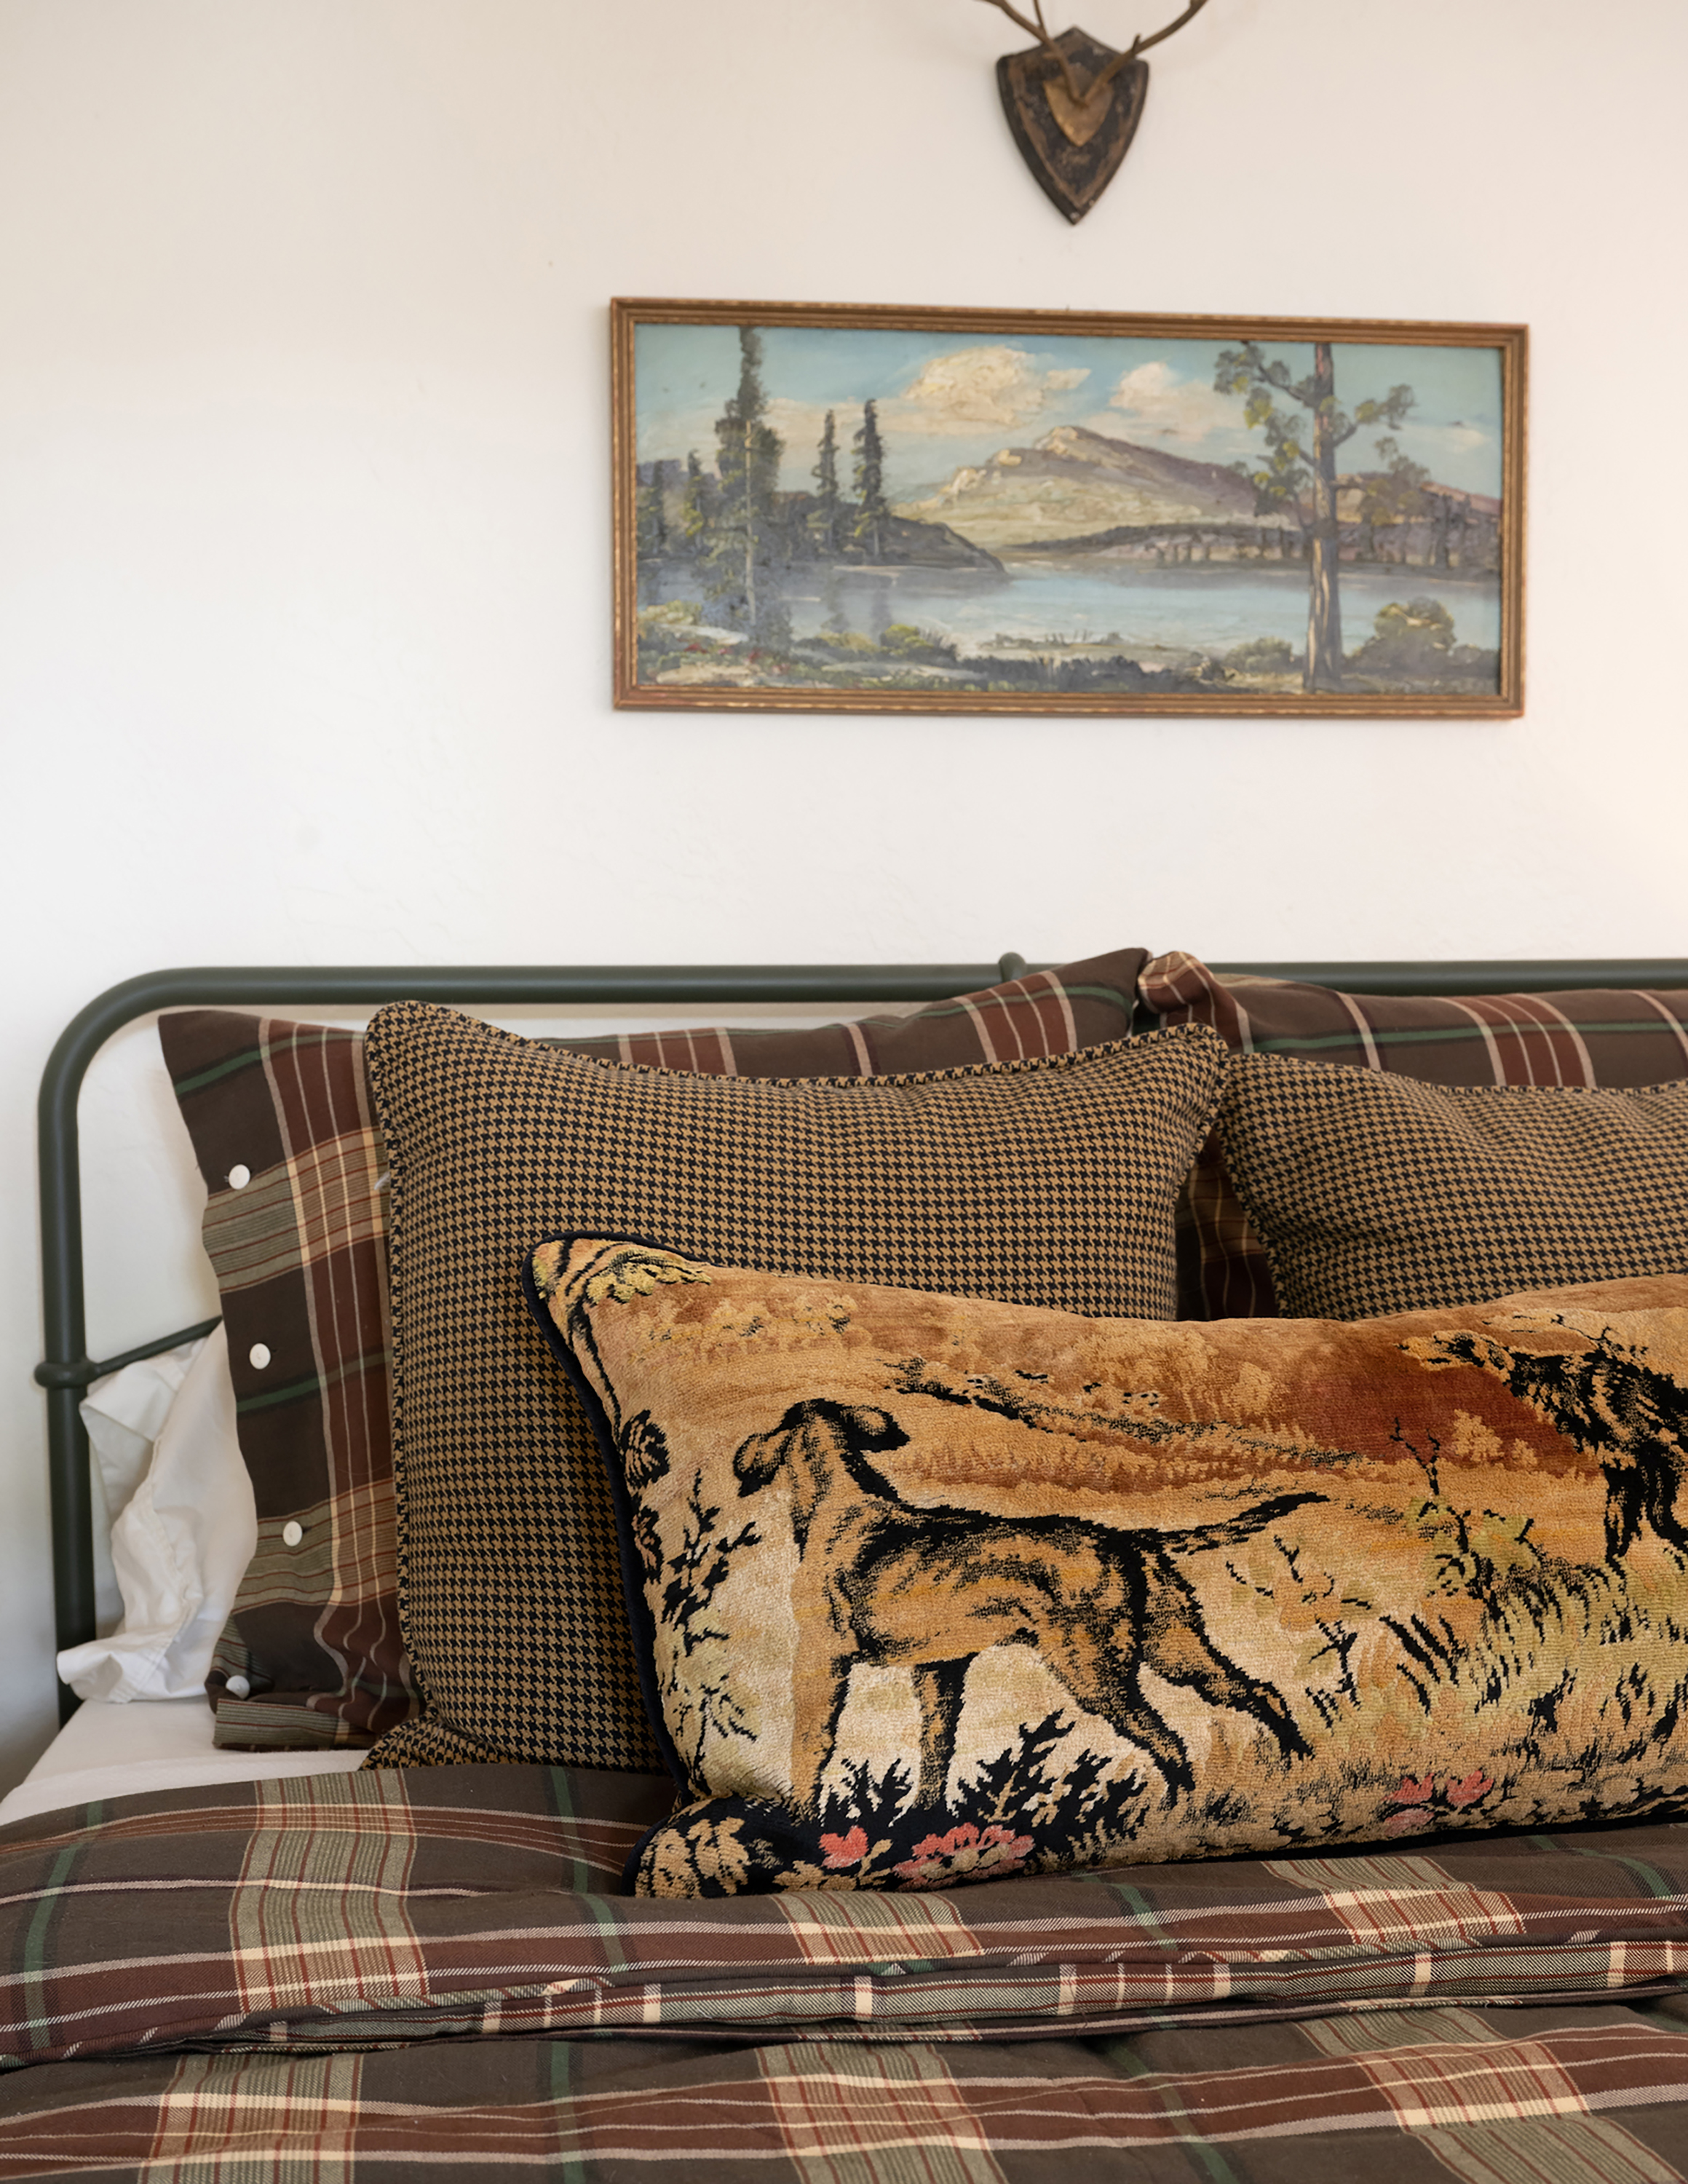 A one-of-a-kind pillow on the bed catches the eye, crafted from an antique tapestry discovered during an antiquing adventure.